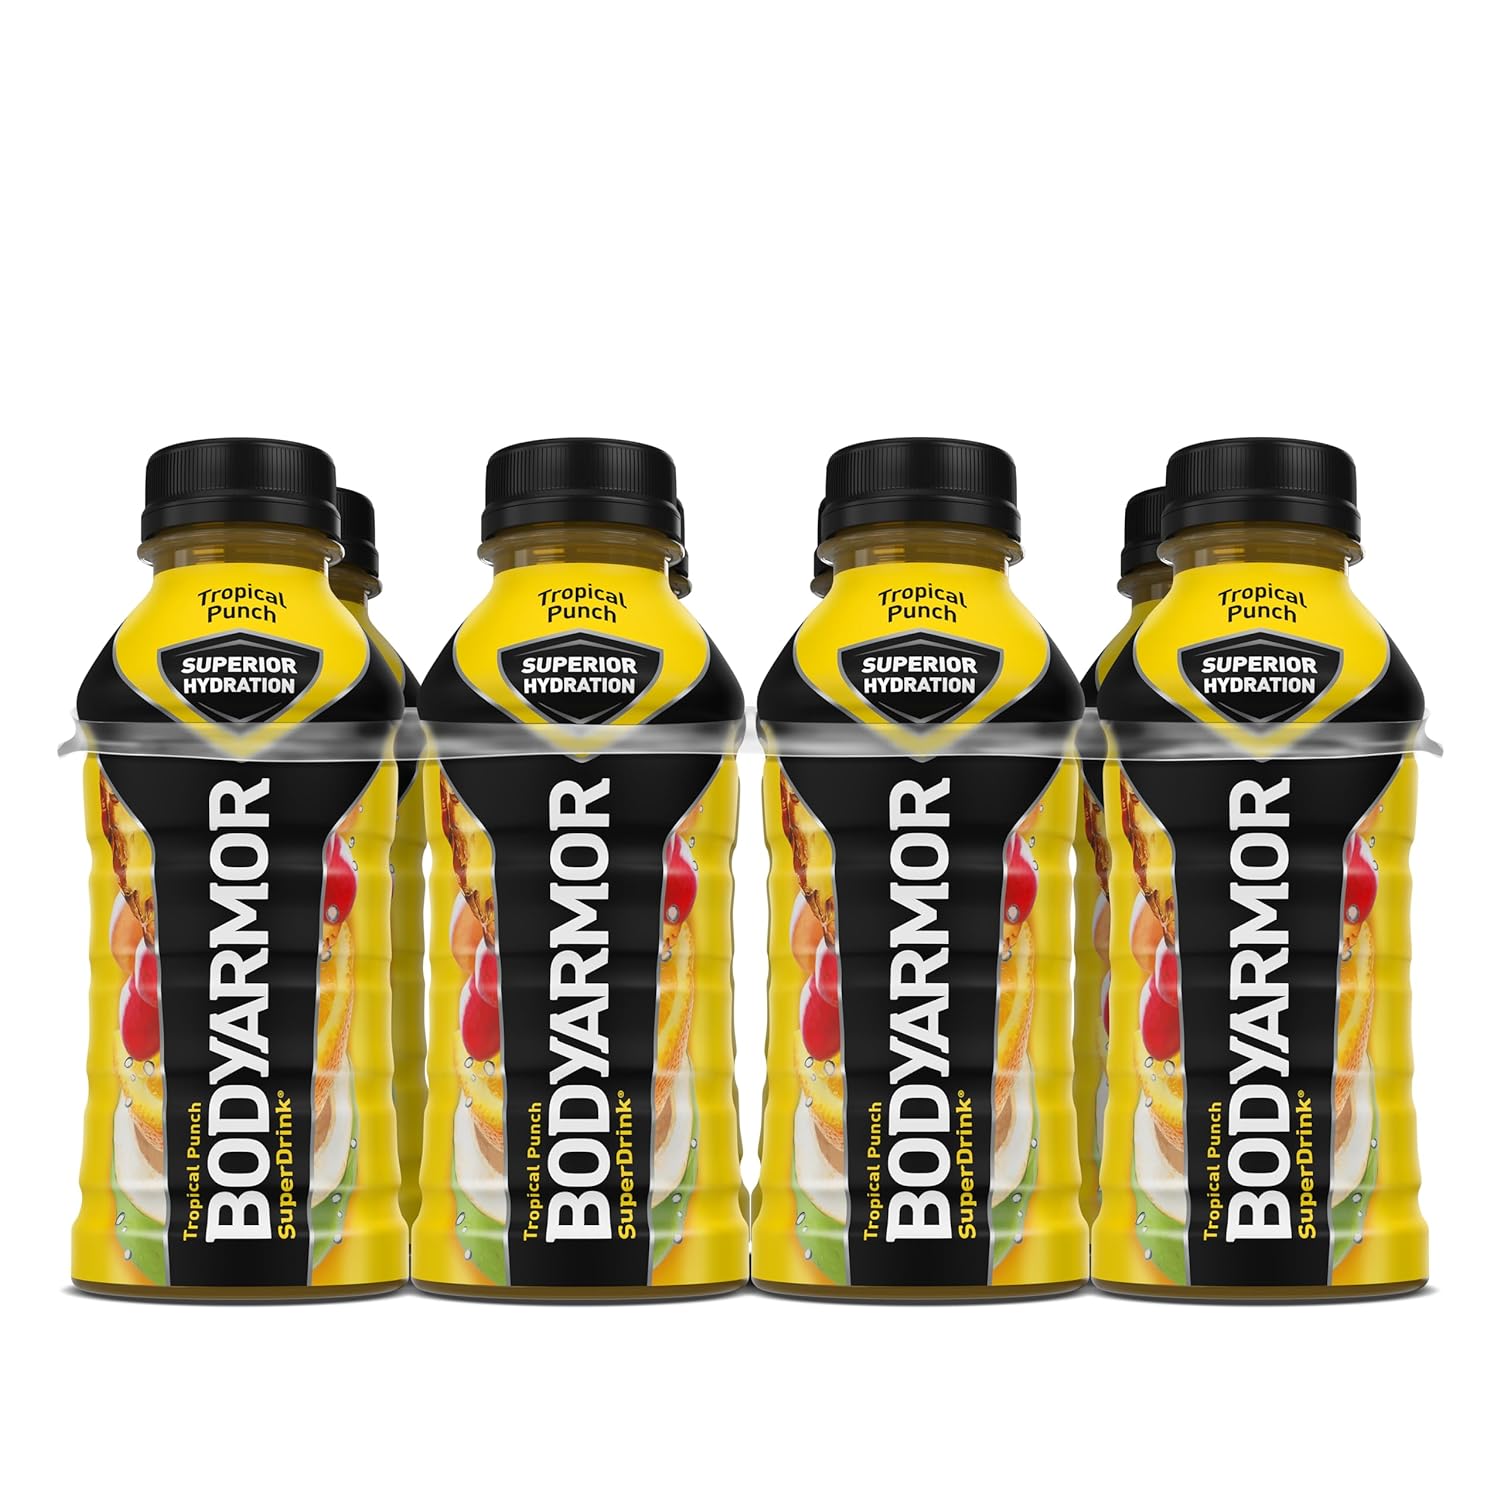 BODYARMOR Sports Drink: 8-Count 12-Oz (Tropical Punch or Strawberry Grape) $4.85, 6-Count 20-Oz LYTE (Dragonfruit Berry) $5.60 & More w/ S&S + FS w/ Prime or on $35+